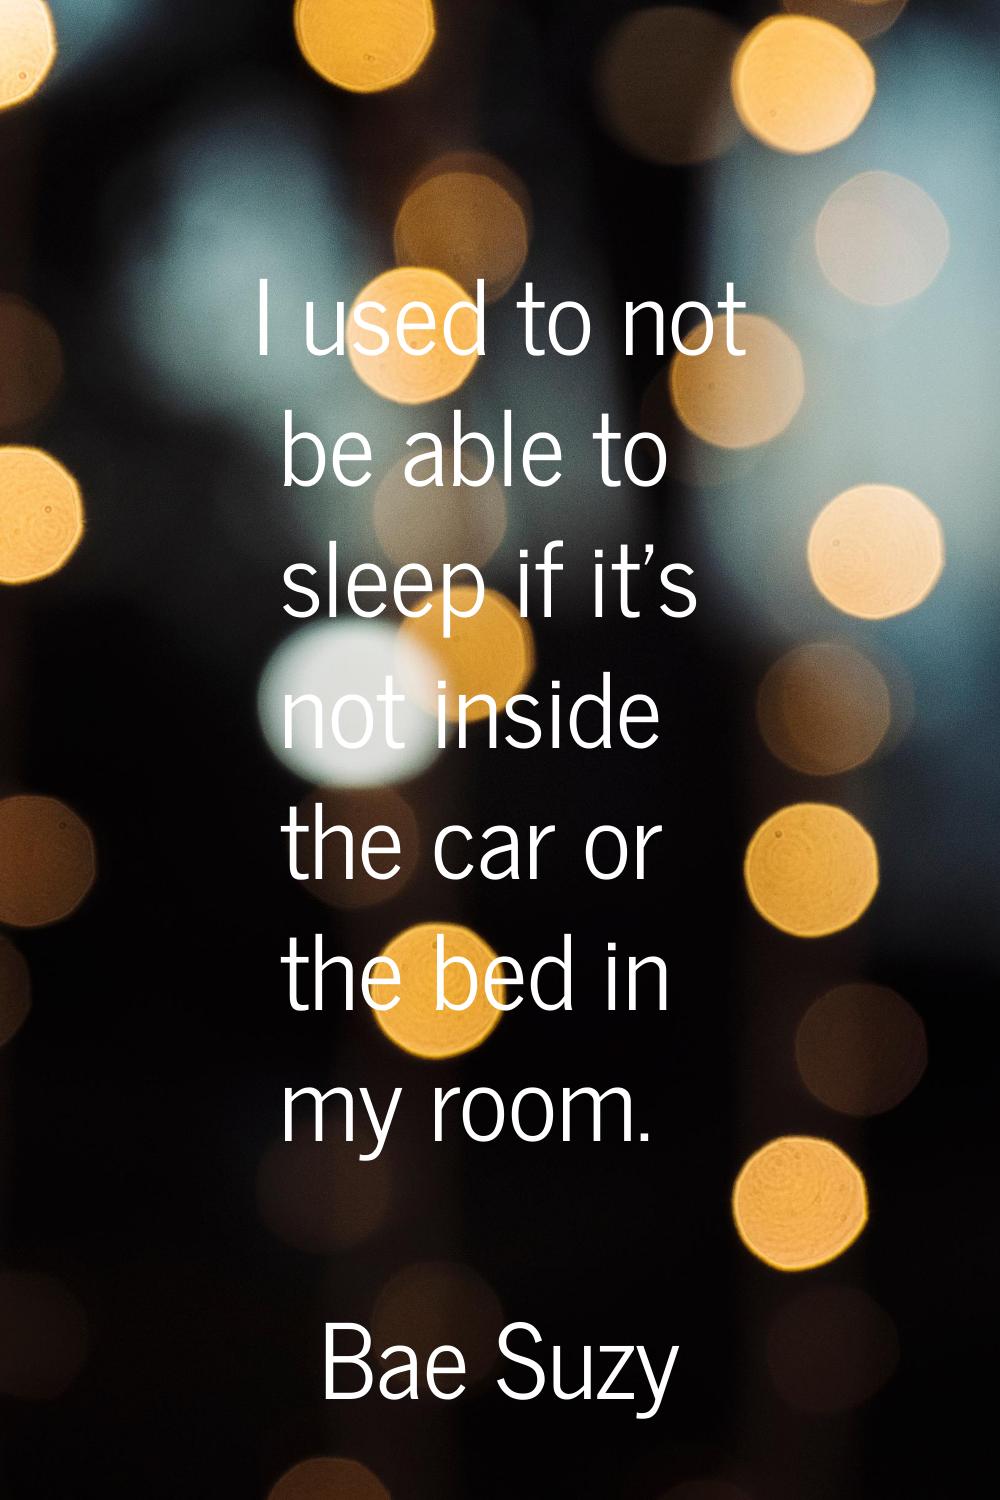 I used to not be able to sleep if it's not inside the car or the bed in my room.